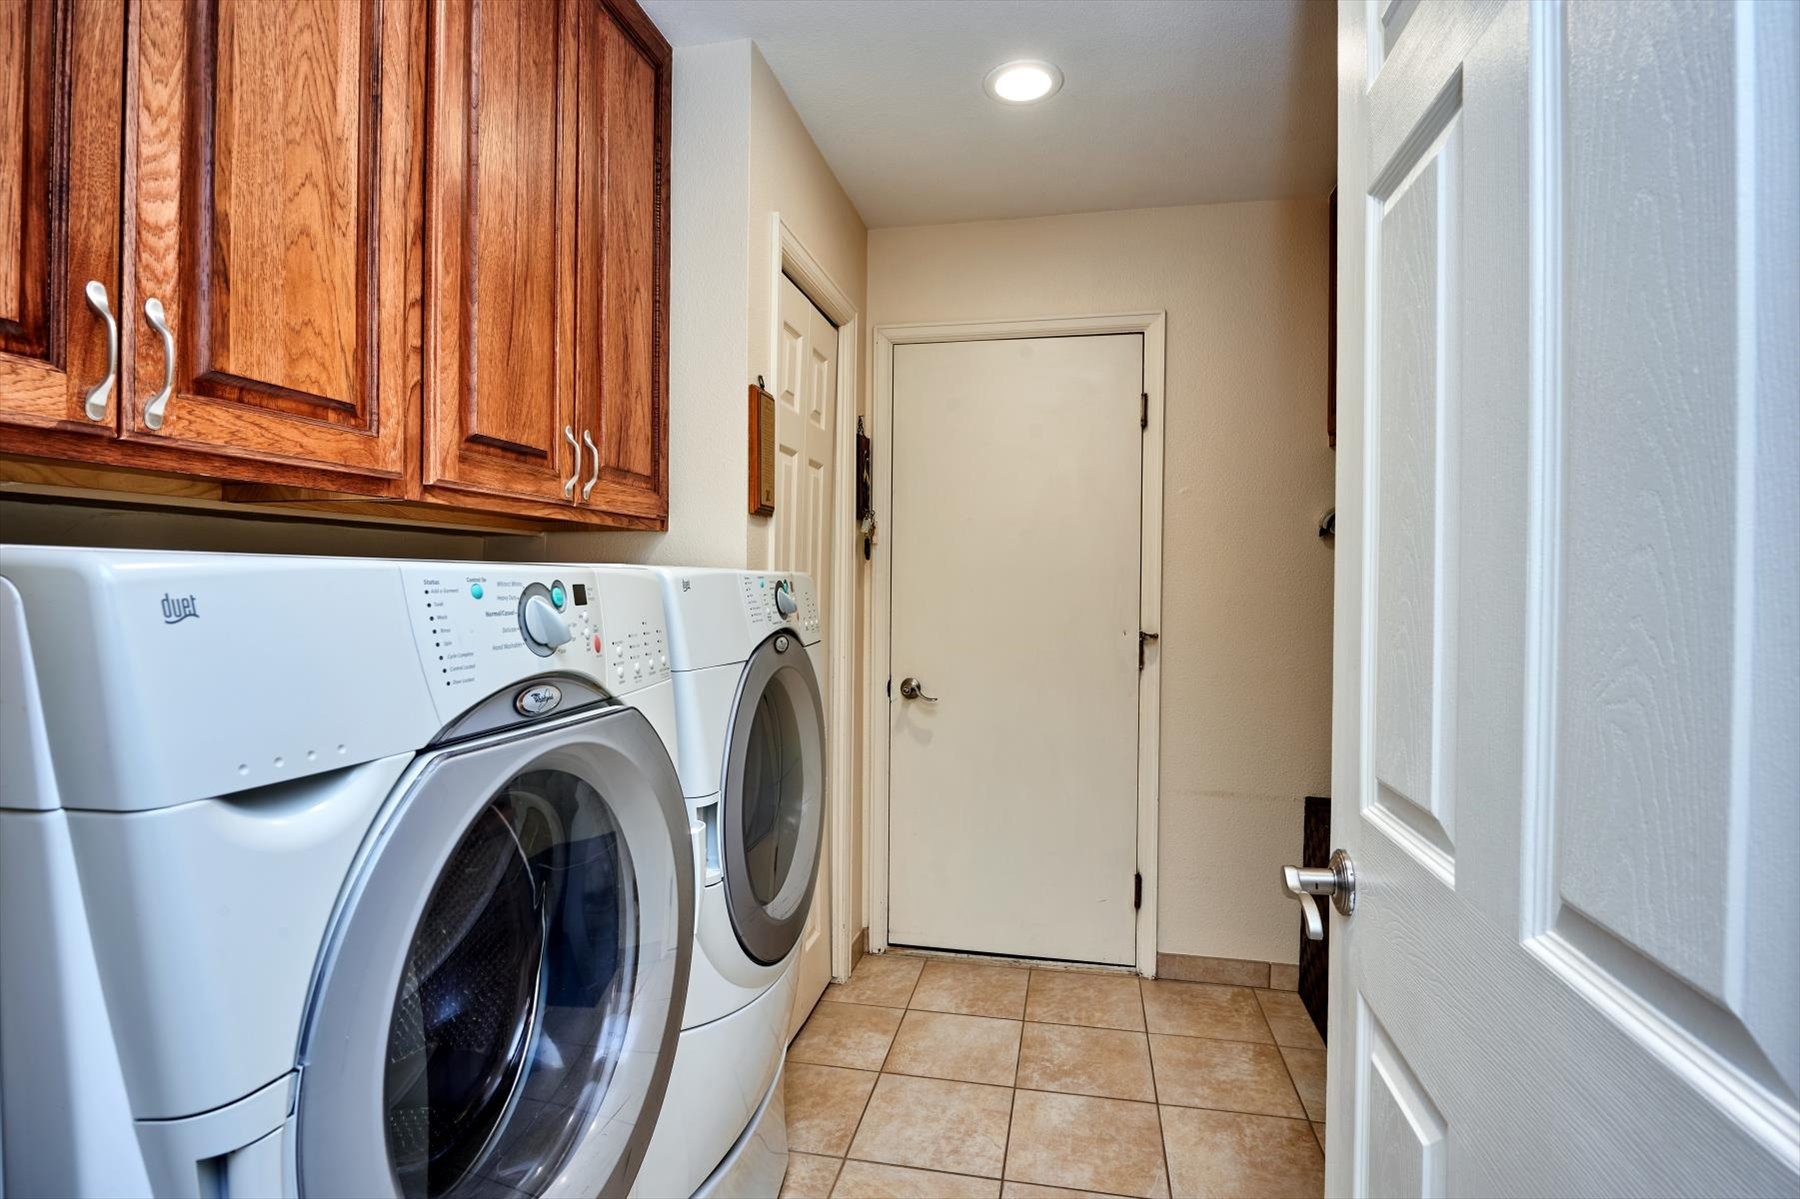 Clothes Washer and Dryer Are Included